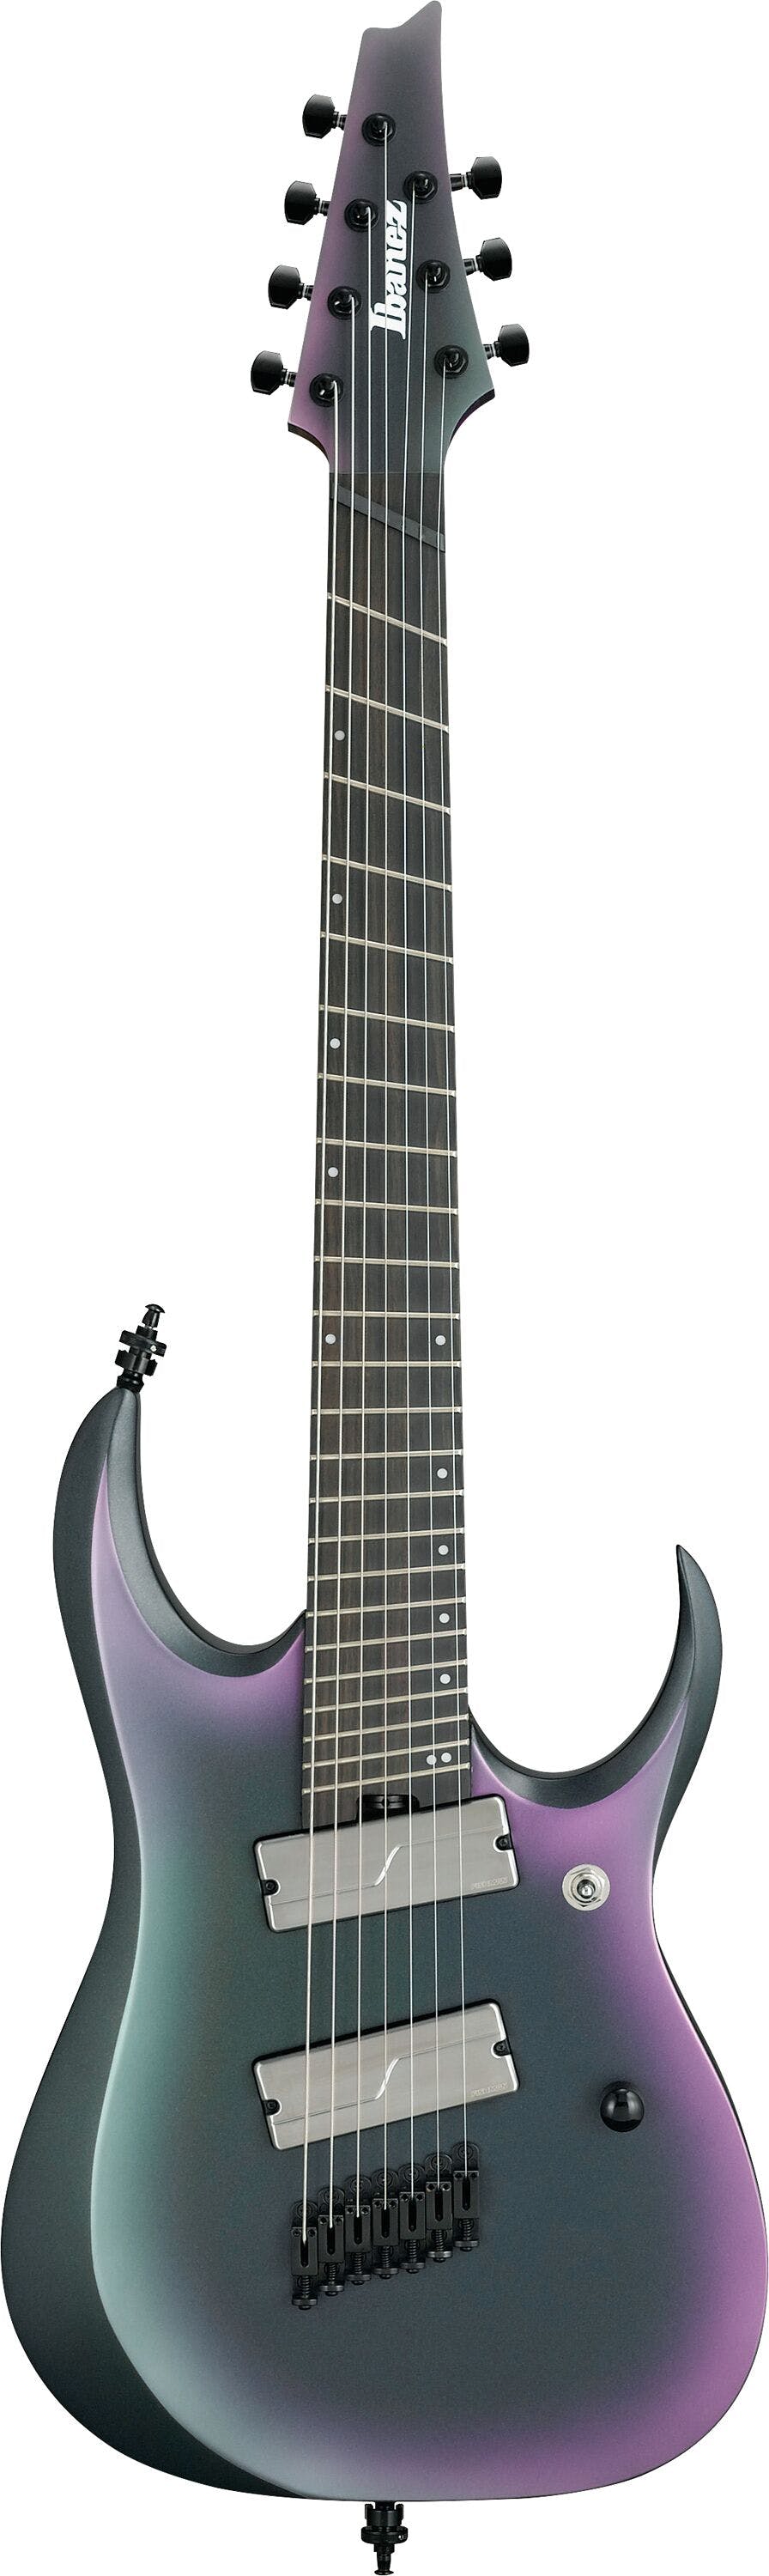 Ibanez Axion Label RGD71ALMS-BAM 7 String Electric Guitar In Black Aurora Burst Matte - Andertons Music